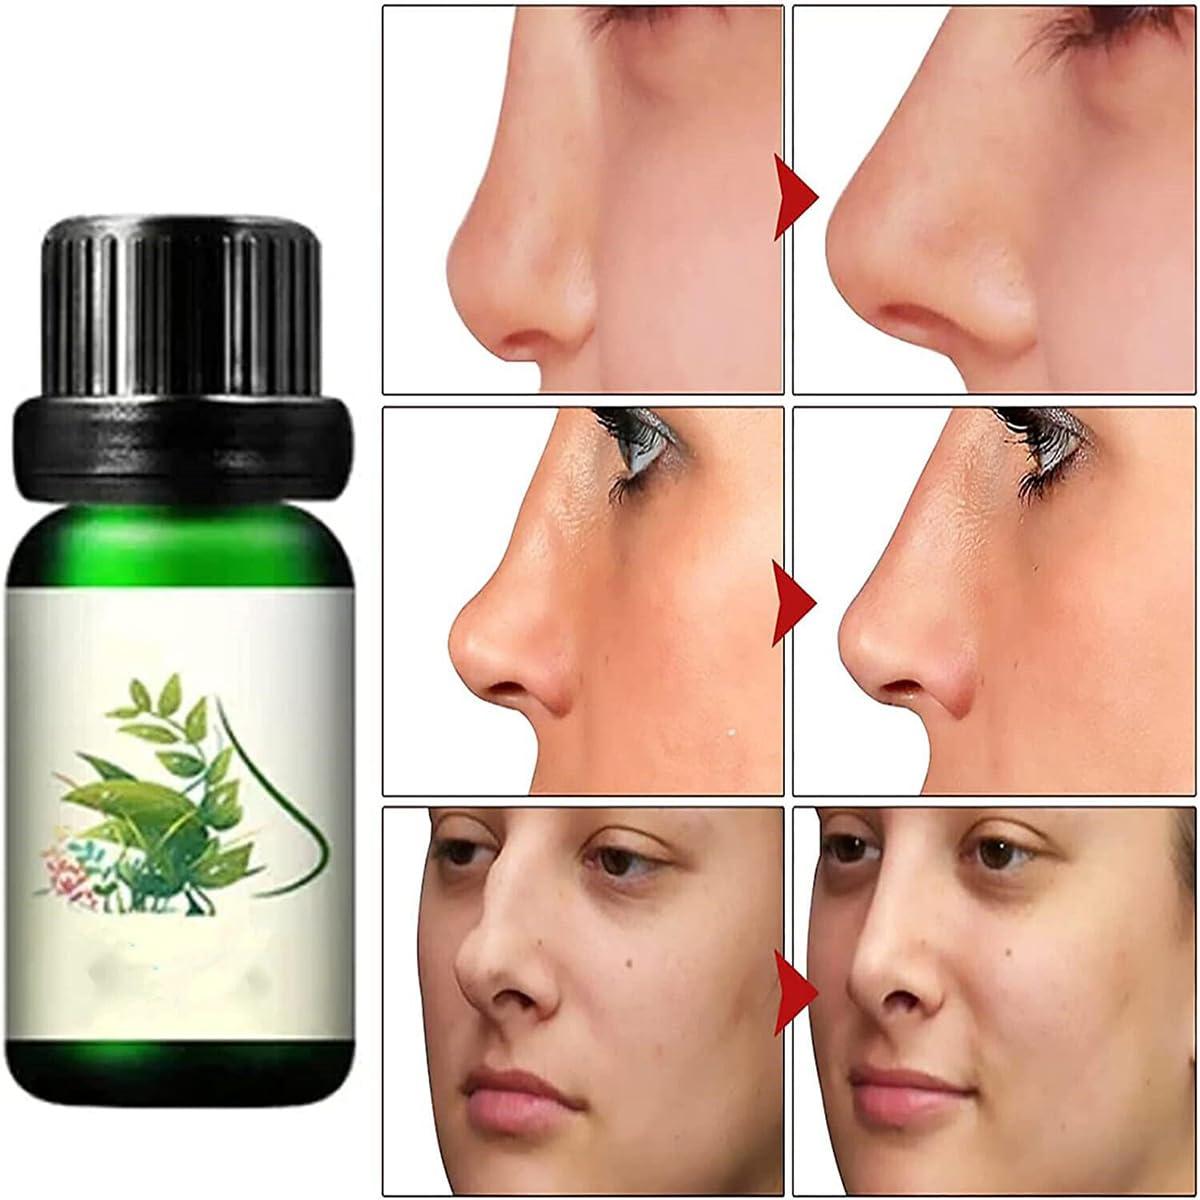 Alkyne Sci-effect Nose Lift Shaping Oil Nose Up Heighten Rhinoplasty  Essential Oil Nasal Bone Remodeling Serum for Nose Heighten&Reshaping (3pcs)